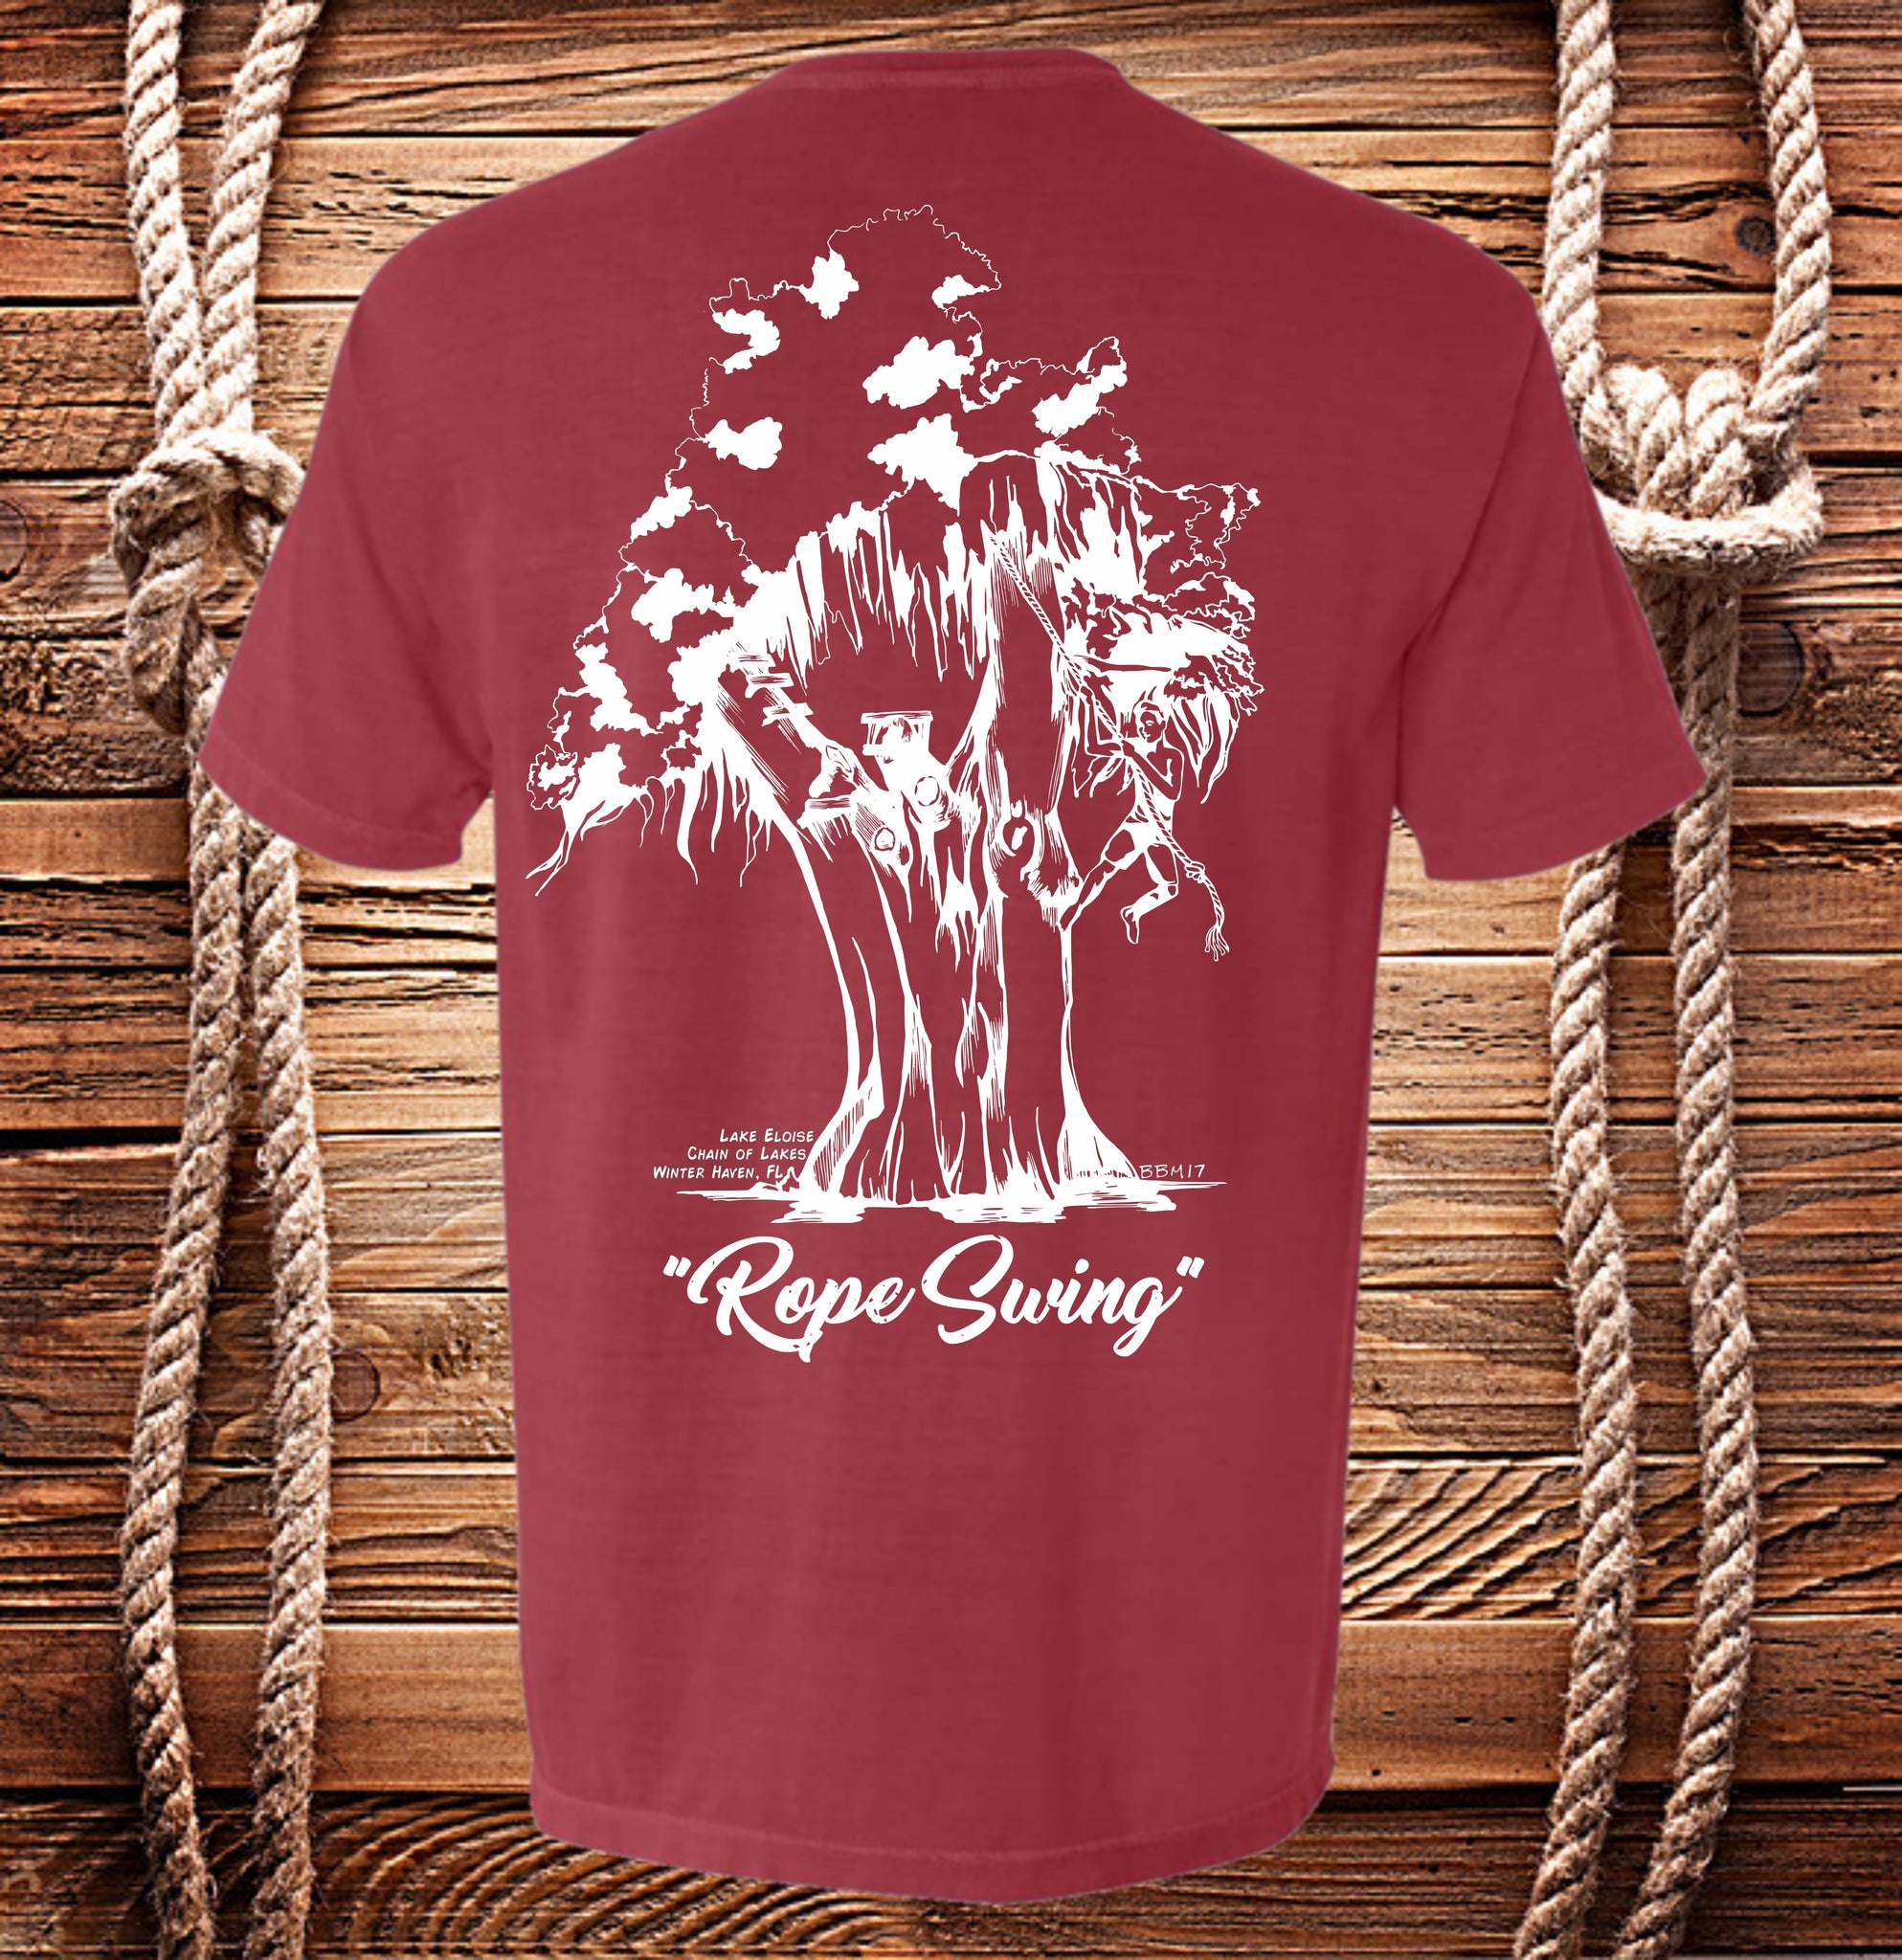 Rope Swing on Lake Eloise T-shirt, Short Sleeve, Hand Drawn by Local Brooke-Braddy Moore